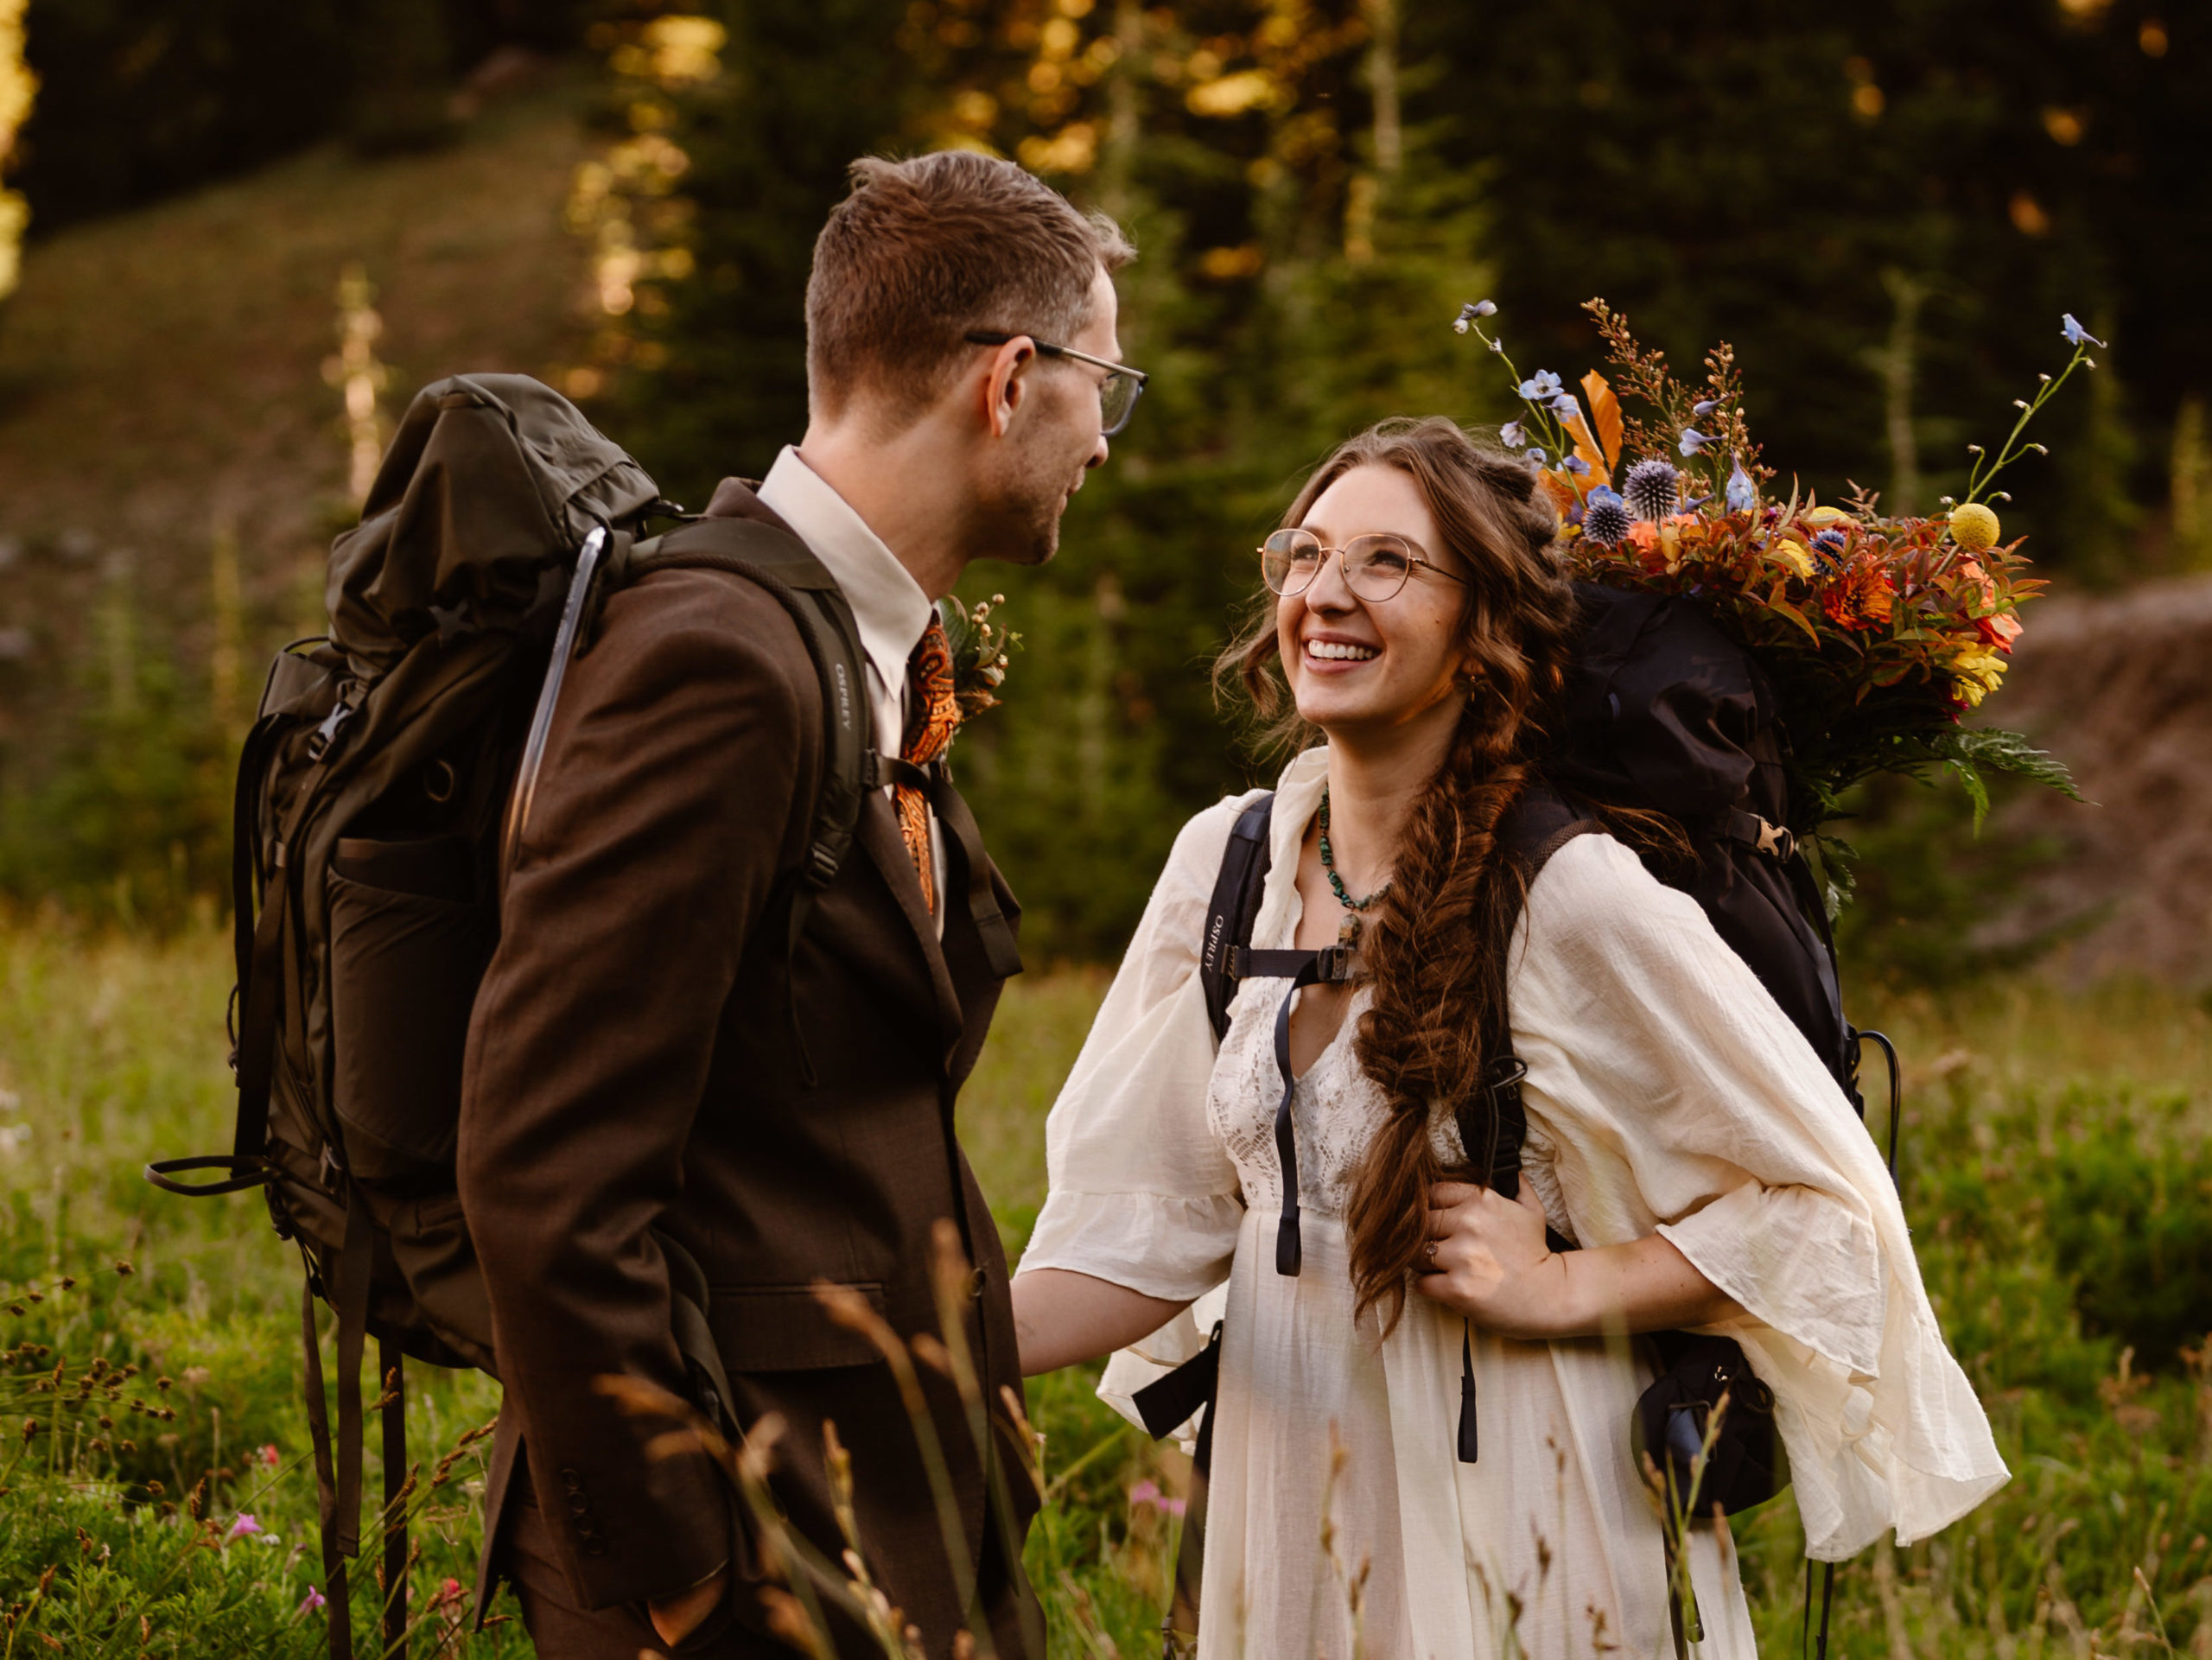 Piper & Kevin hikan Oregon Forest with Tori of Adventure Instead for their elopement